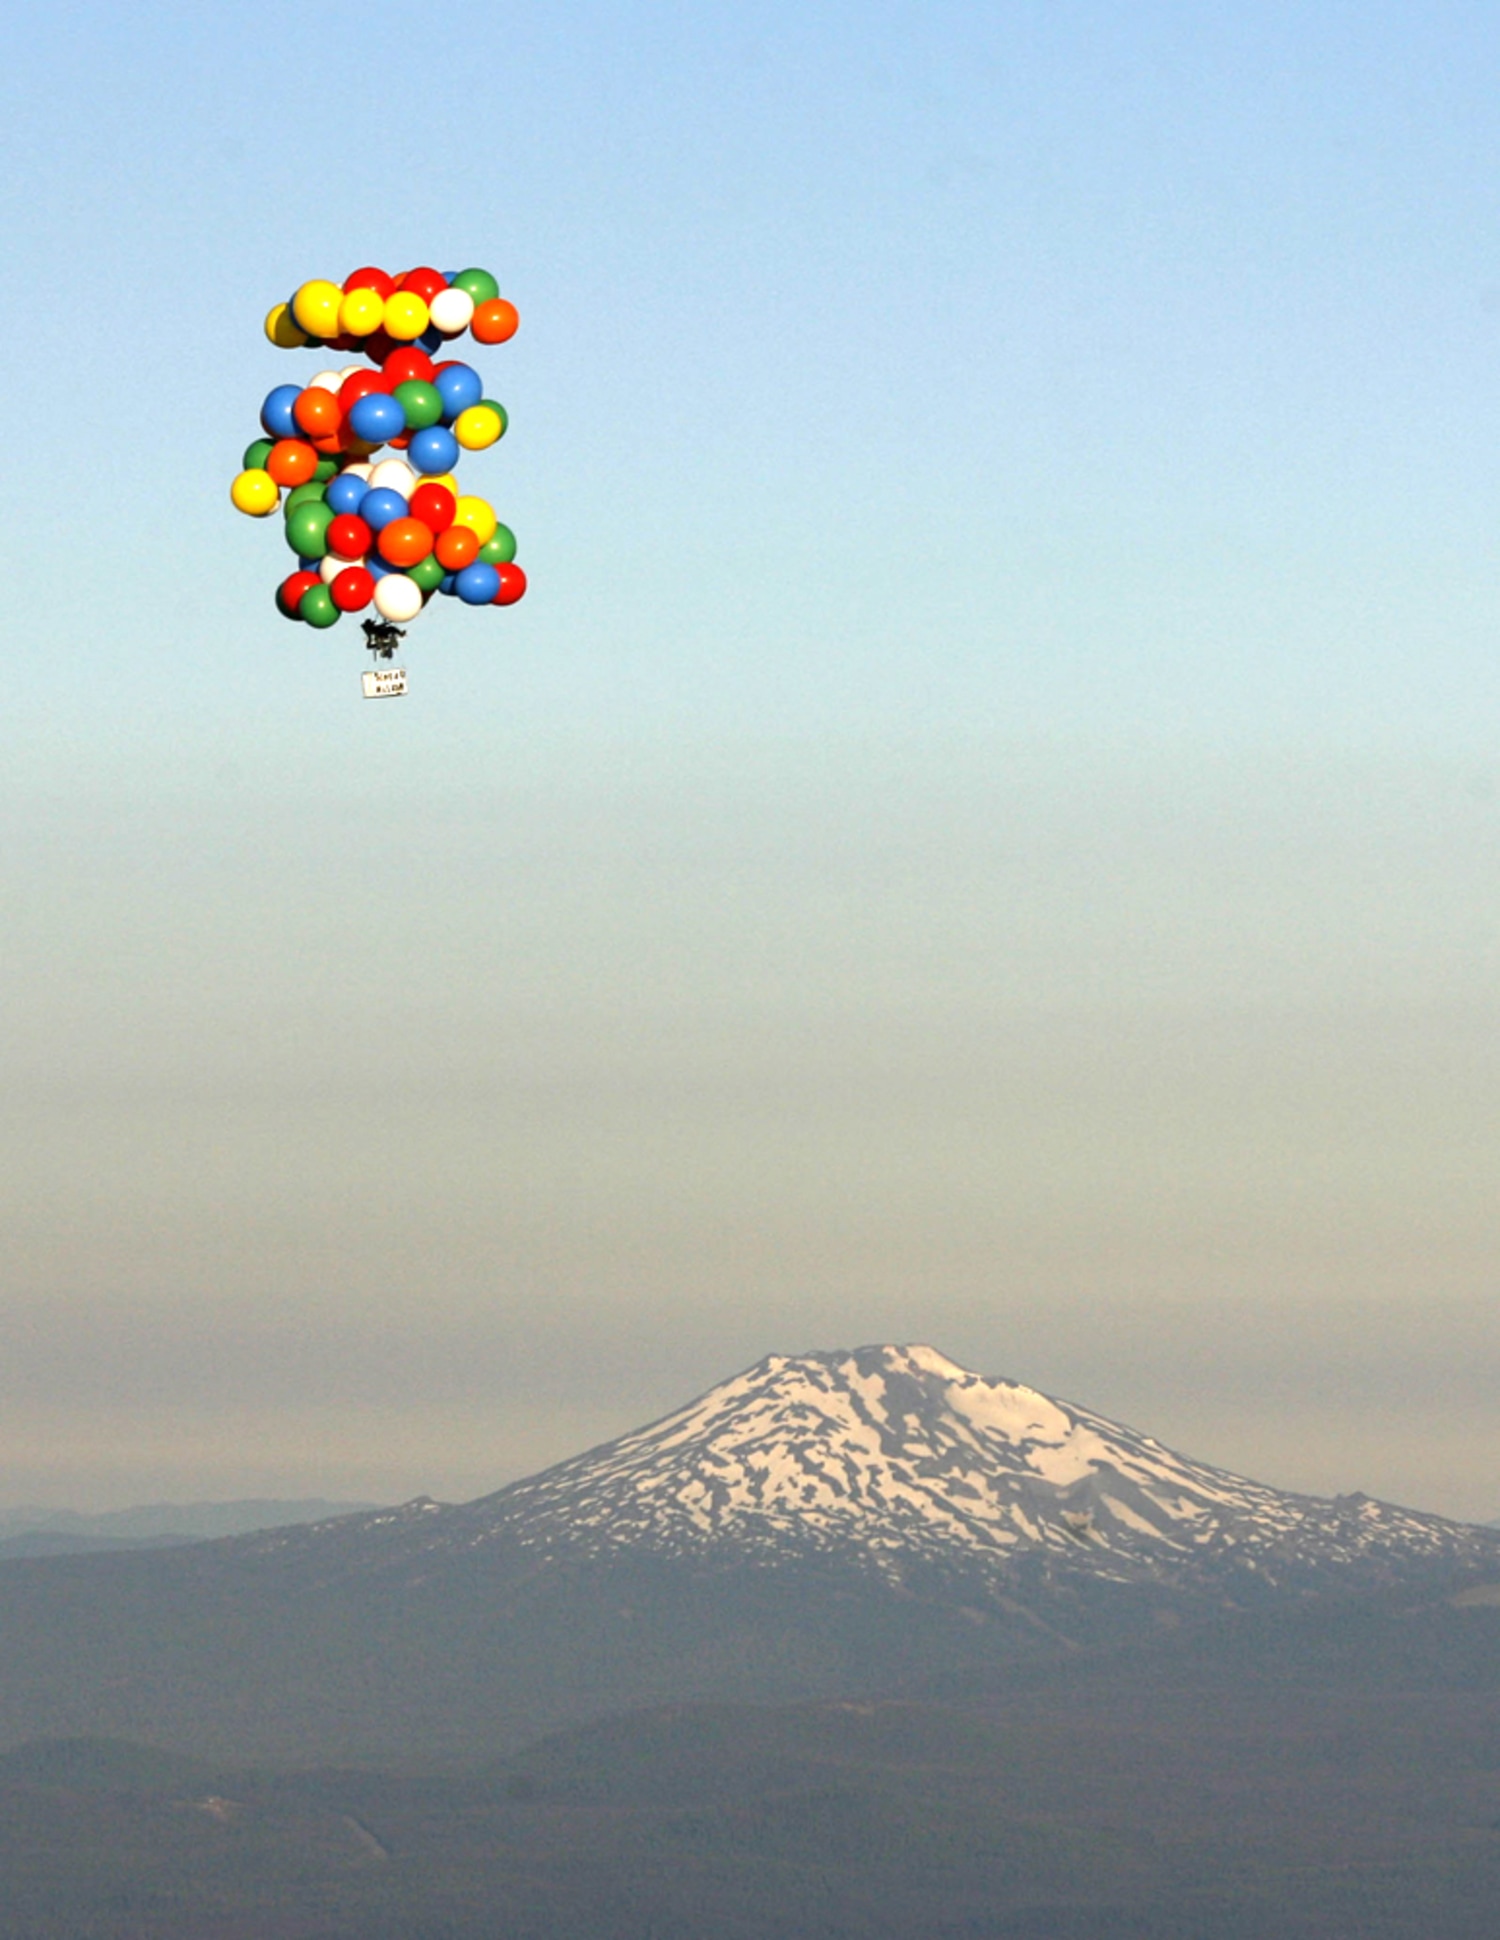 Balloon Atic In Lawn Chair Aims To Fly 300 Miles